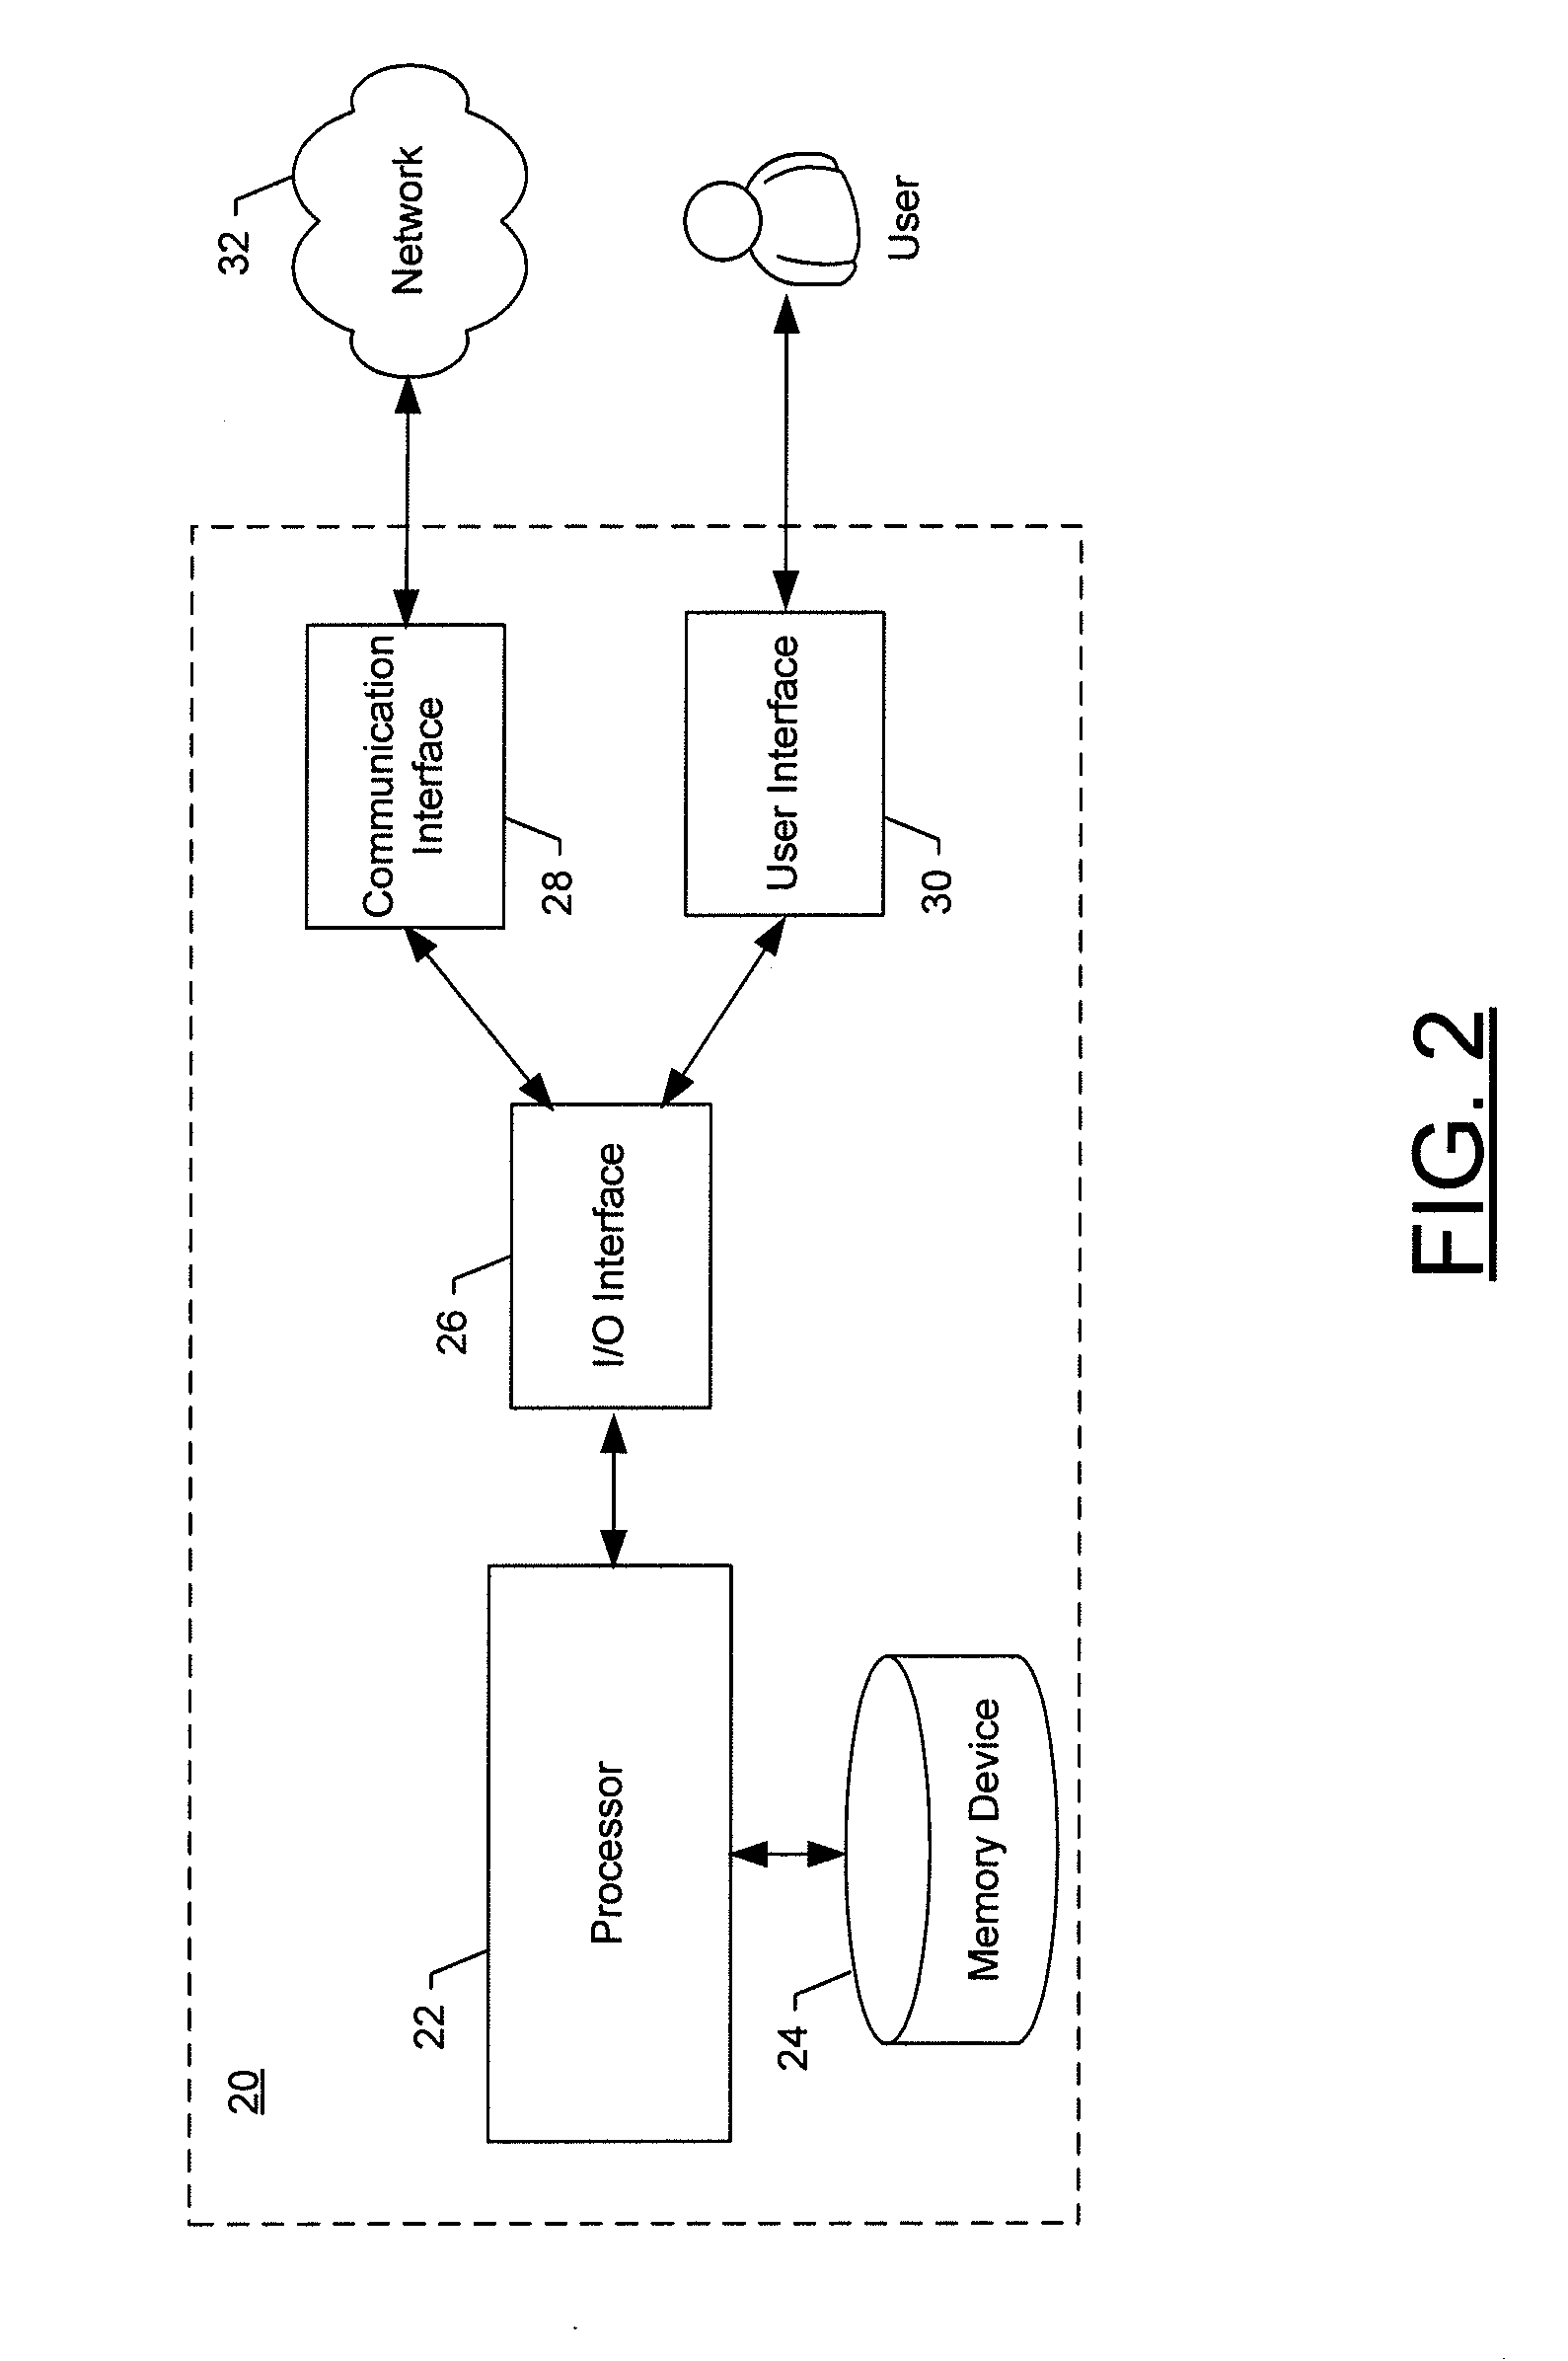 Apparatus, method and computer-readable storage mediums for determining application protocol elements as different types of lawful interception content